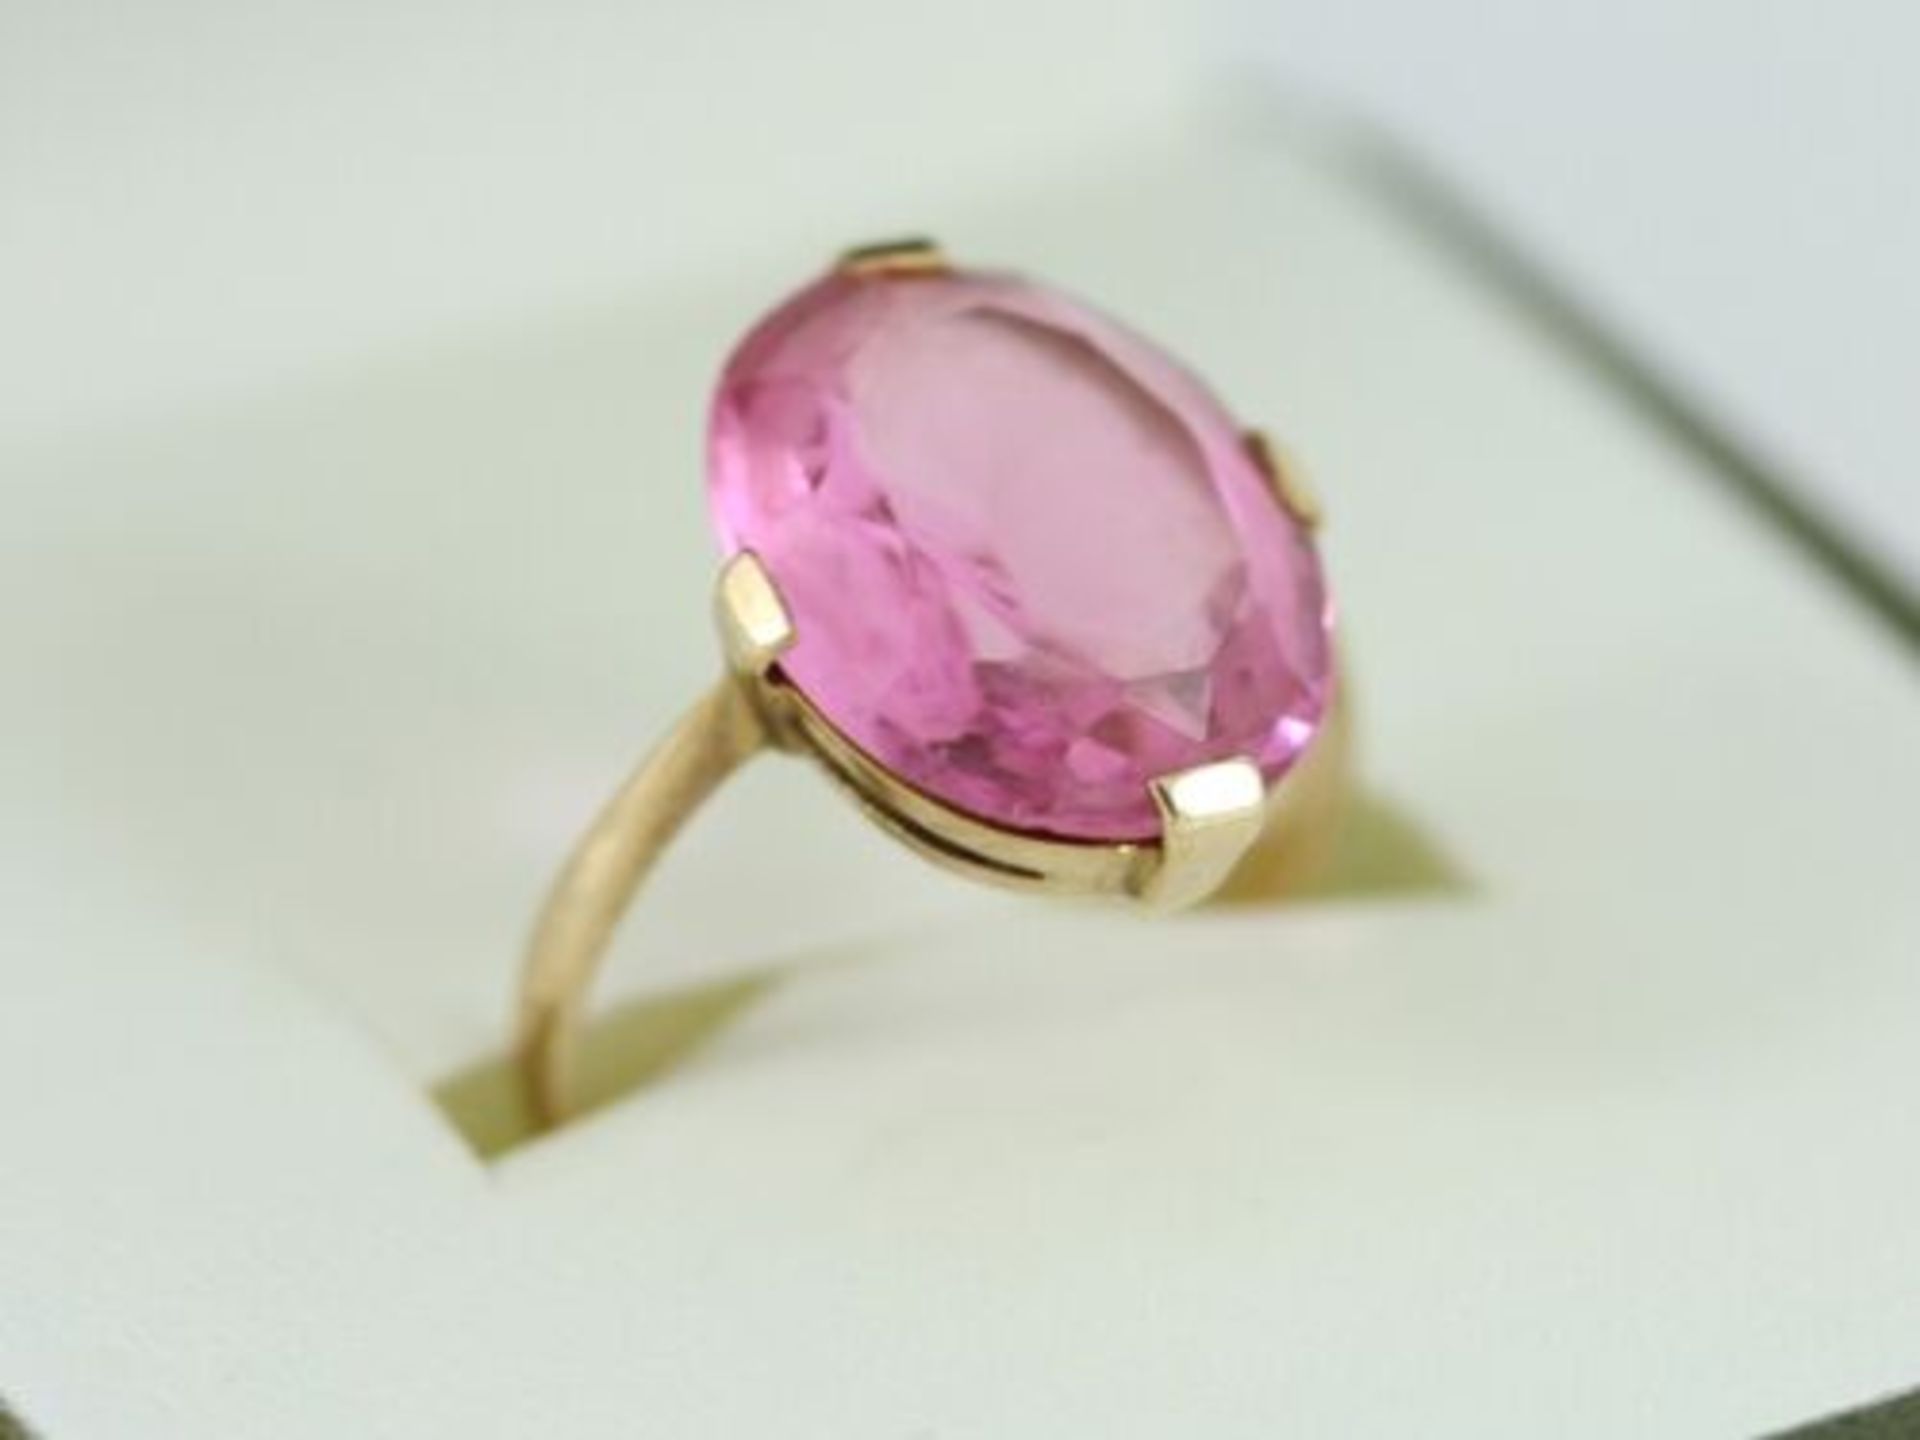 PINK GLASS SOLITAIRE RING 9CT GOLD LADIES SIZE K 1/2 375 3.1G CZ51